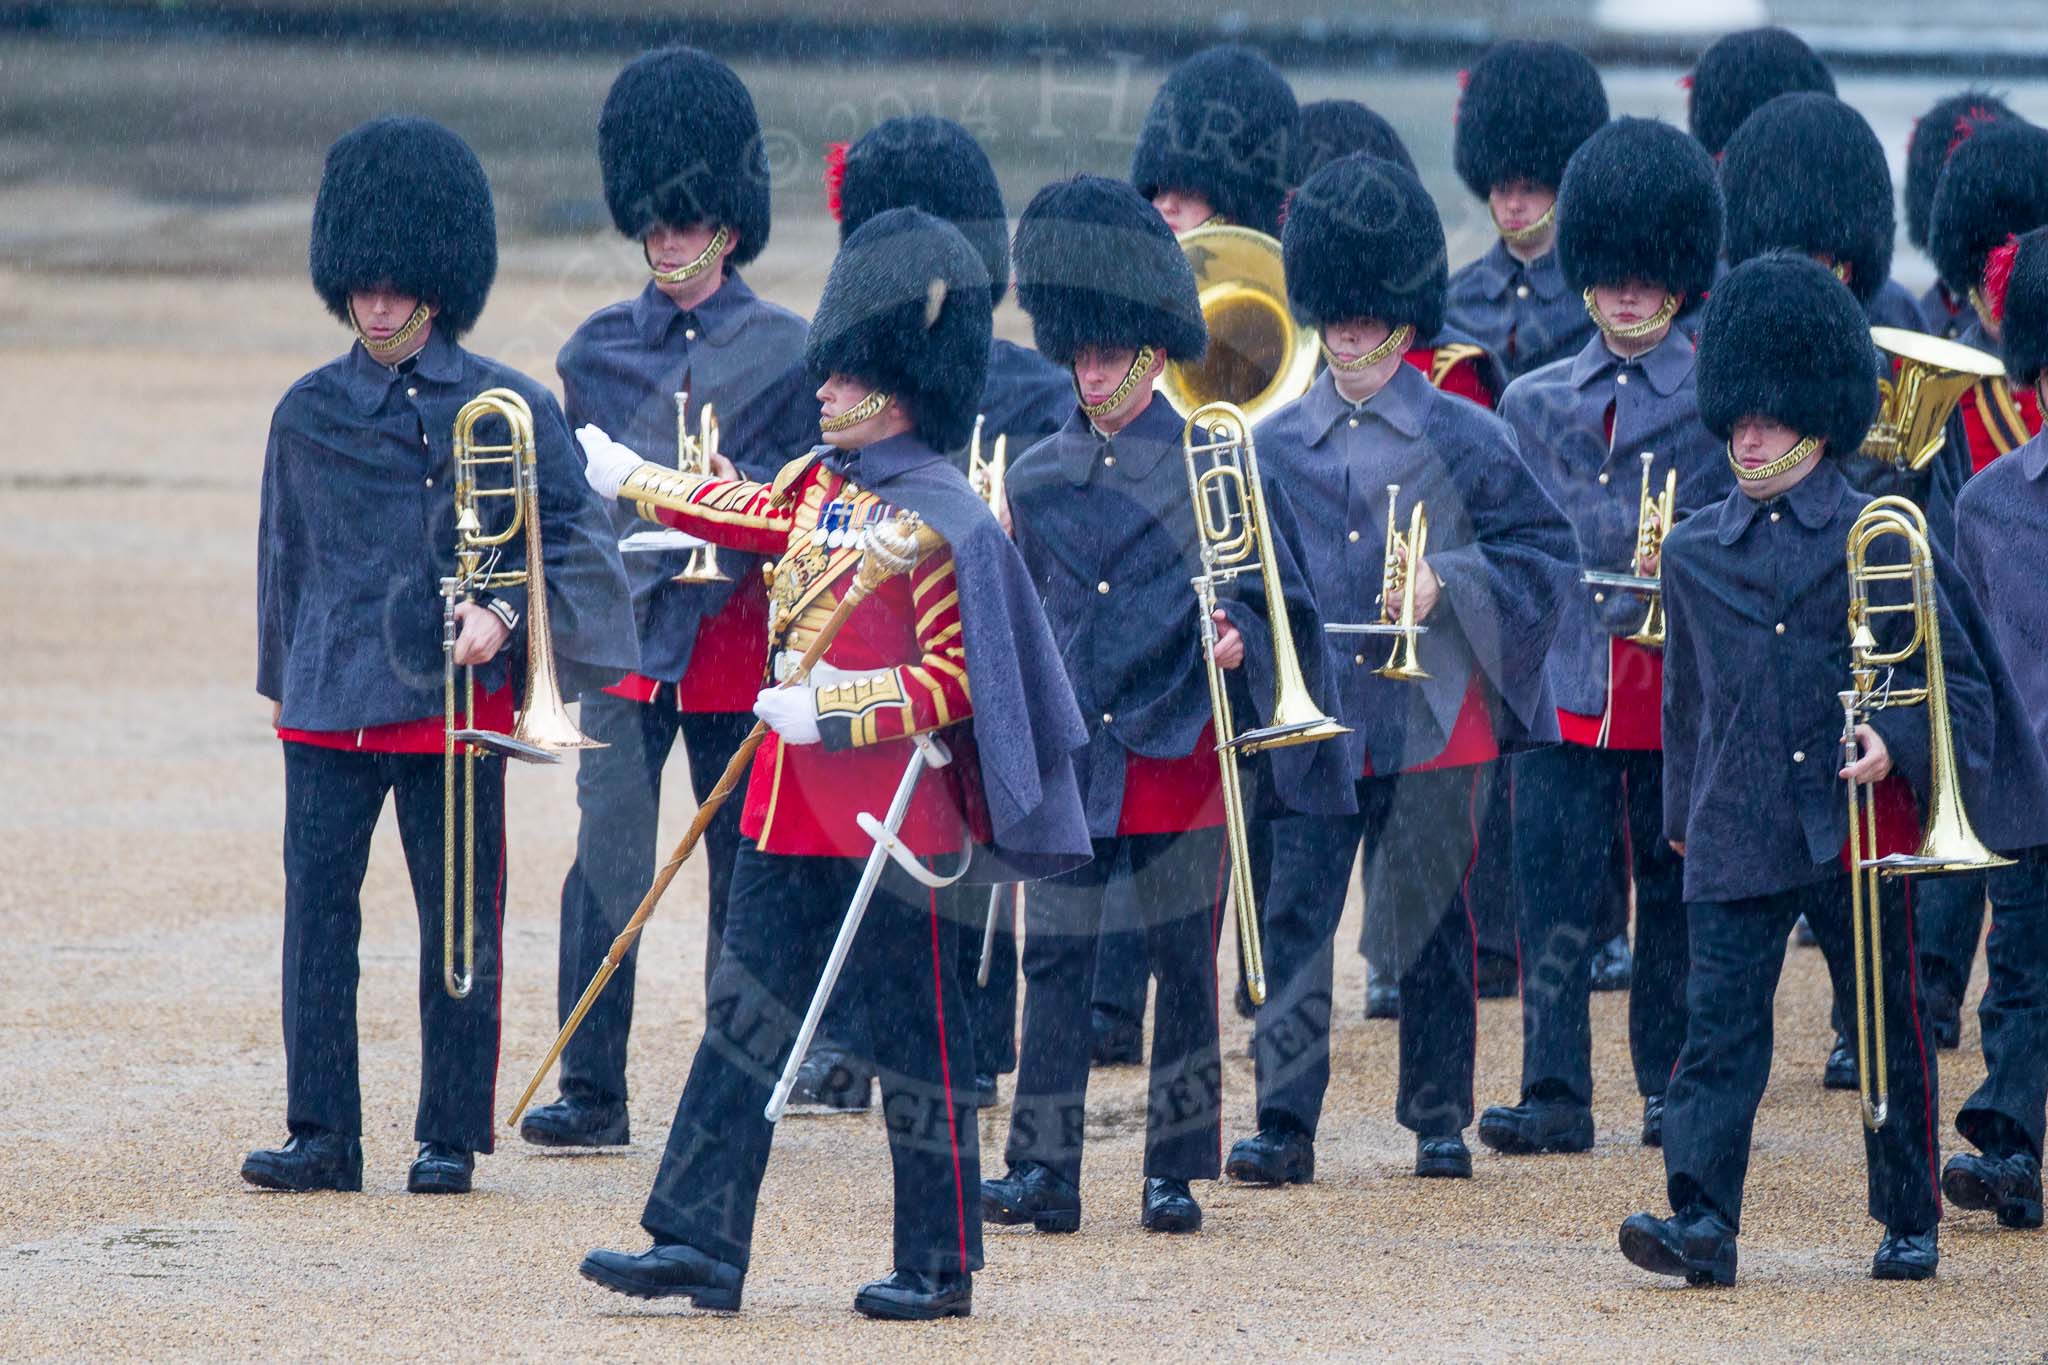 The Colonel's Review 2014.
Horse Guards Parade, Westminster,
London,

United Kingdom,
on 07 June 2014 at 10:17, image #87